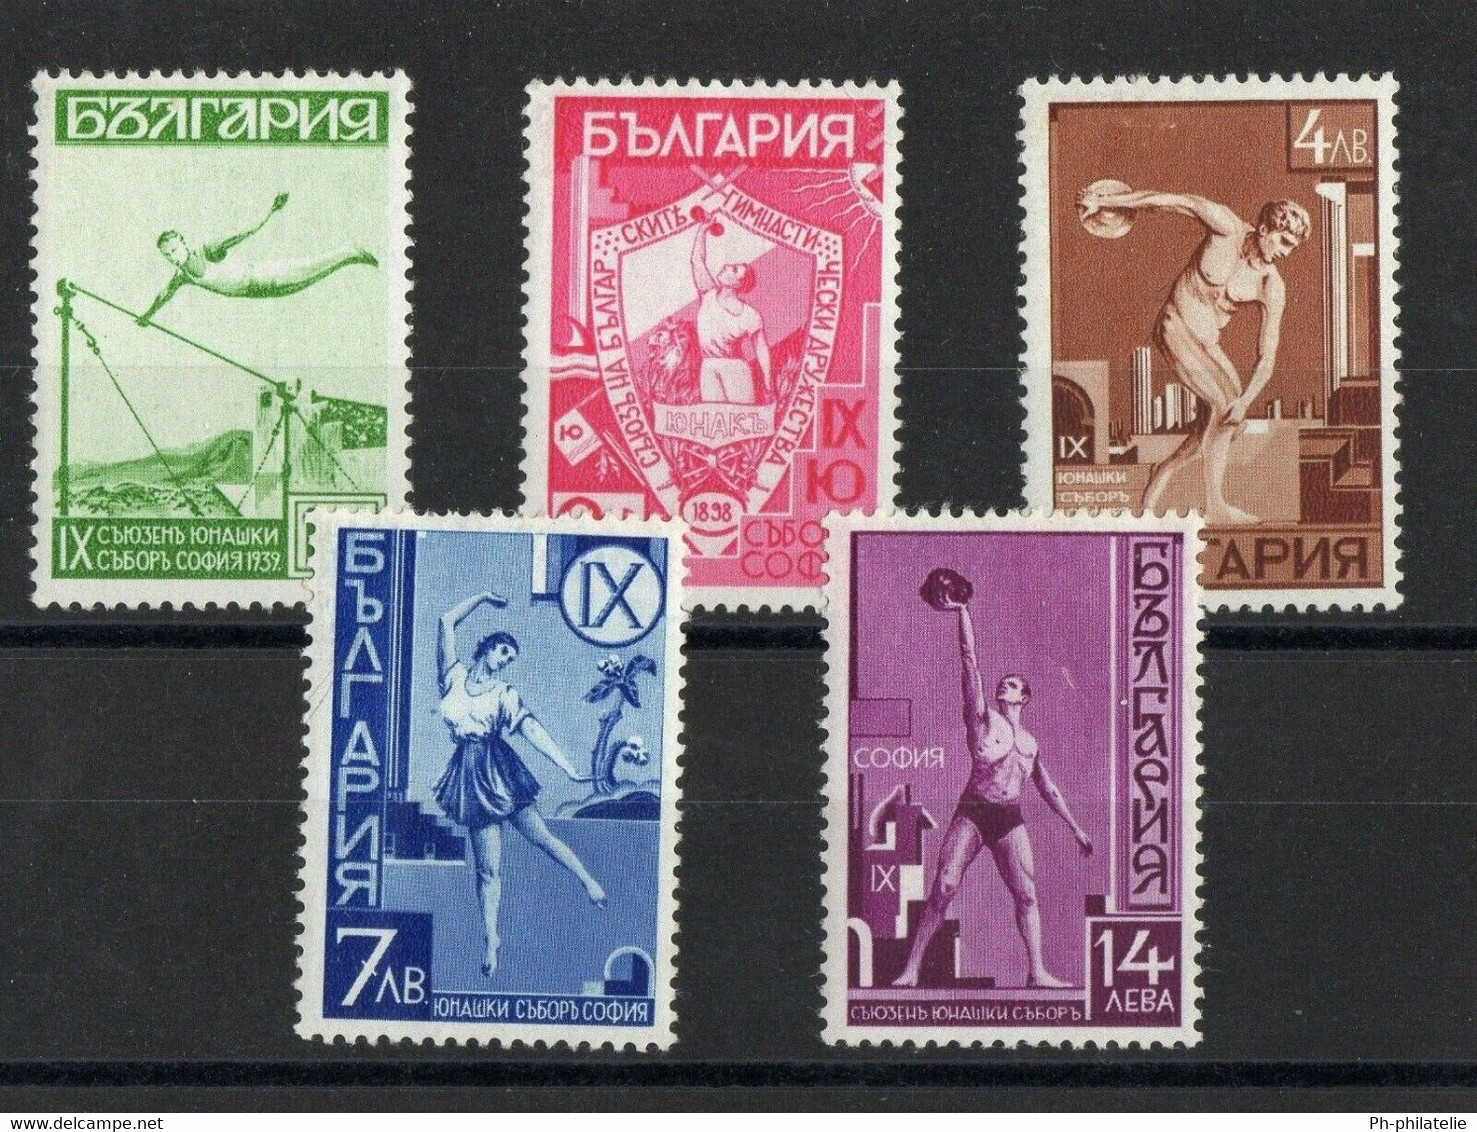 BULGARIE: SERIE COMPLETE DE 5 TIMBRES NEUF* N°335/339 - Neufs